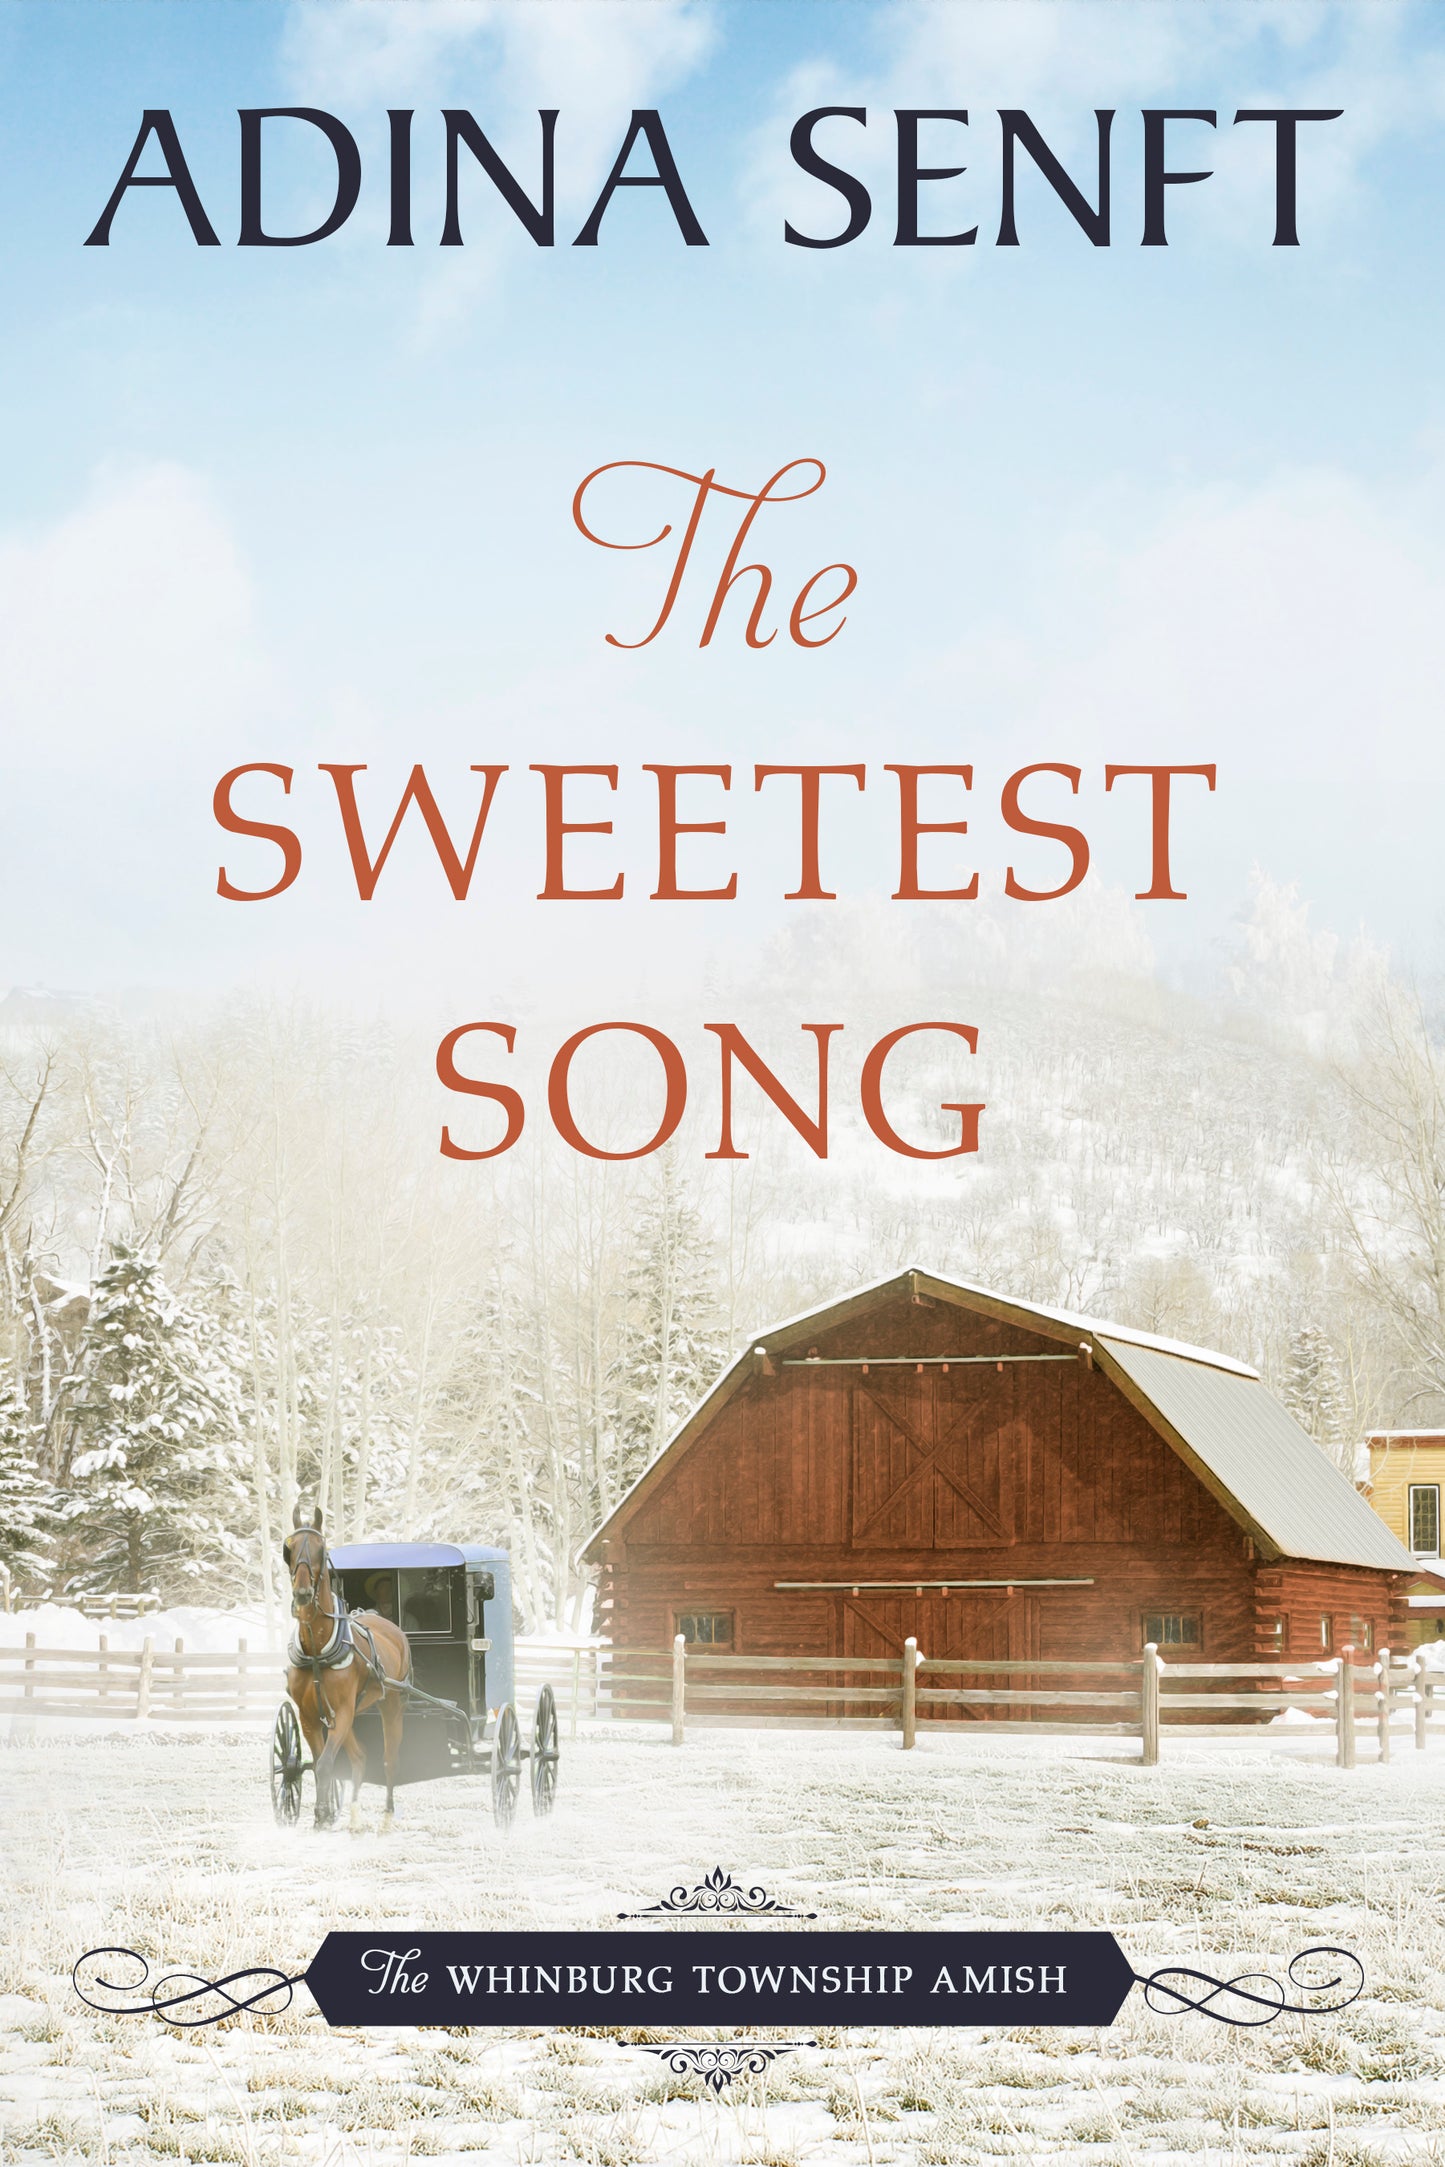 The Sweetest Song by Adina Senft, a Whinburg Township Amish romance novel